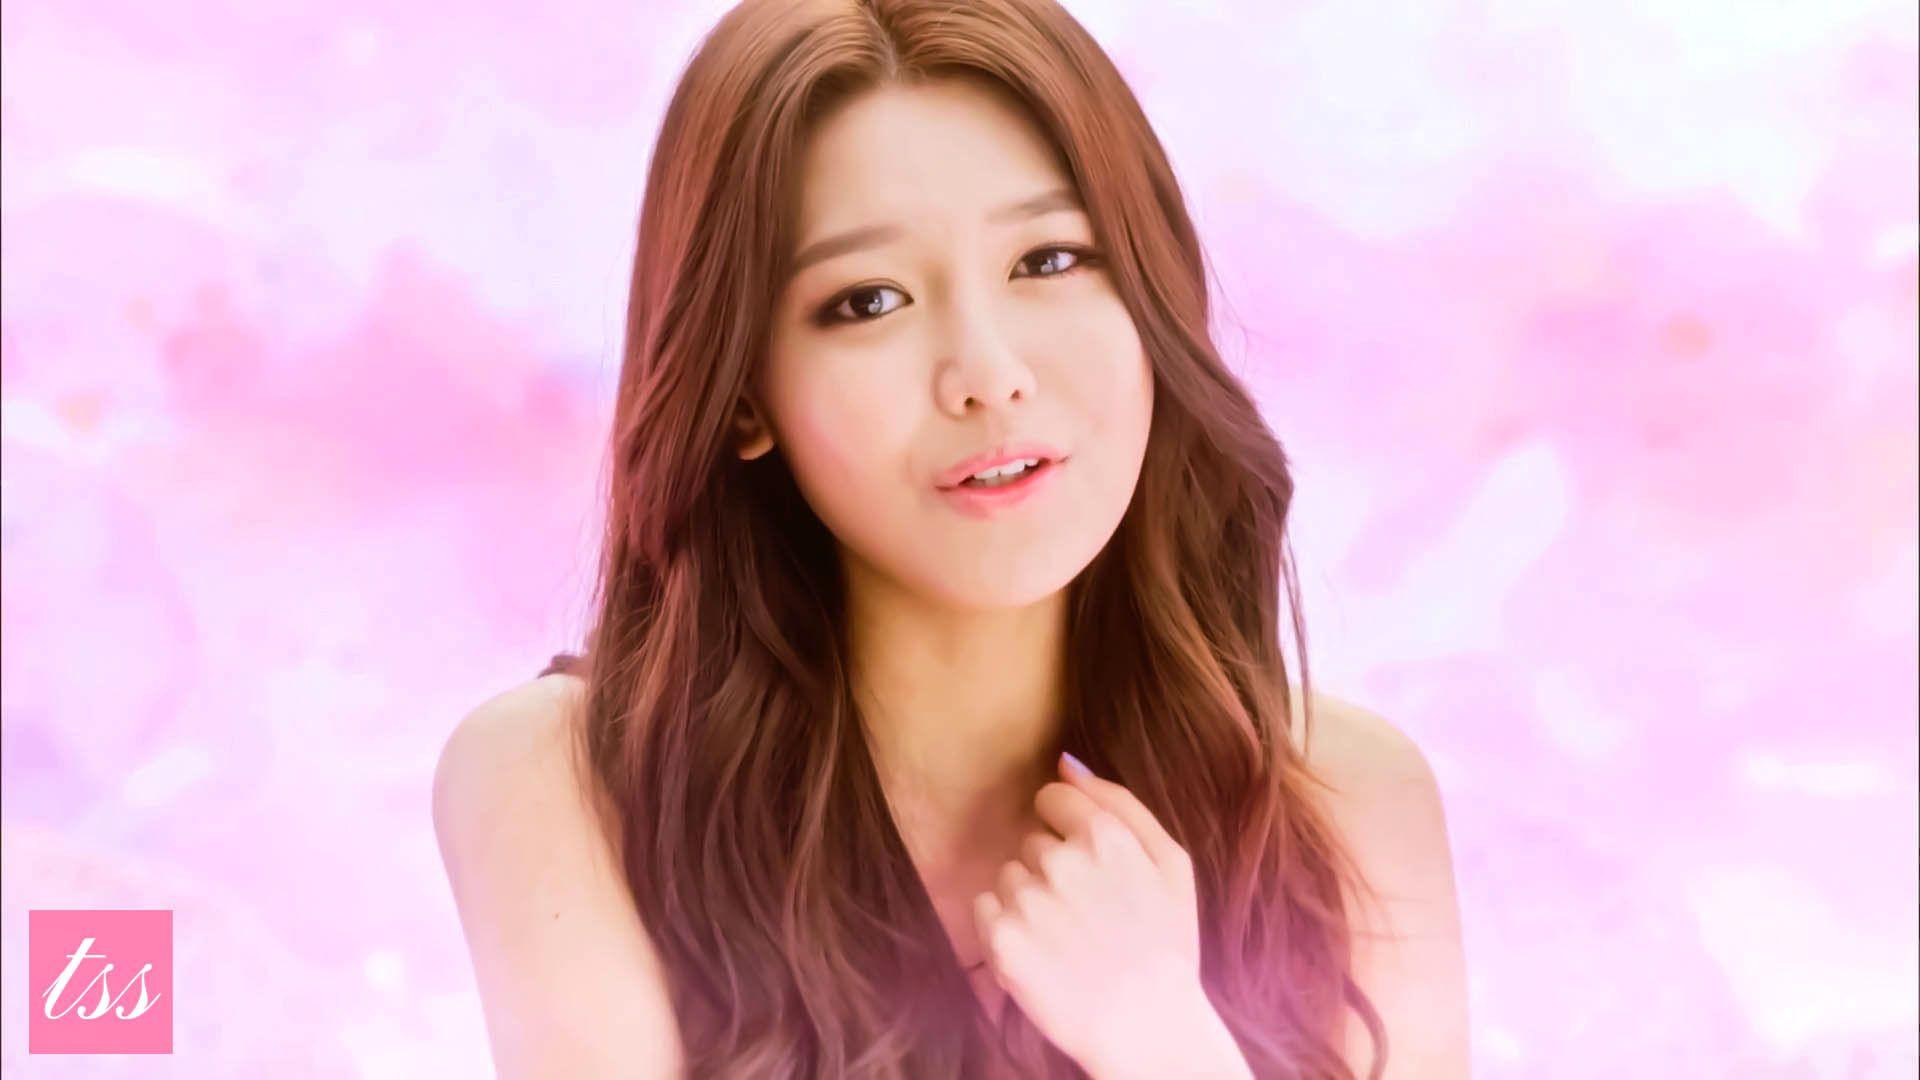 Image Gallery Sooyoung Wallpaper